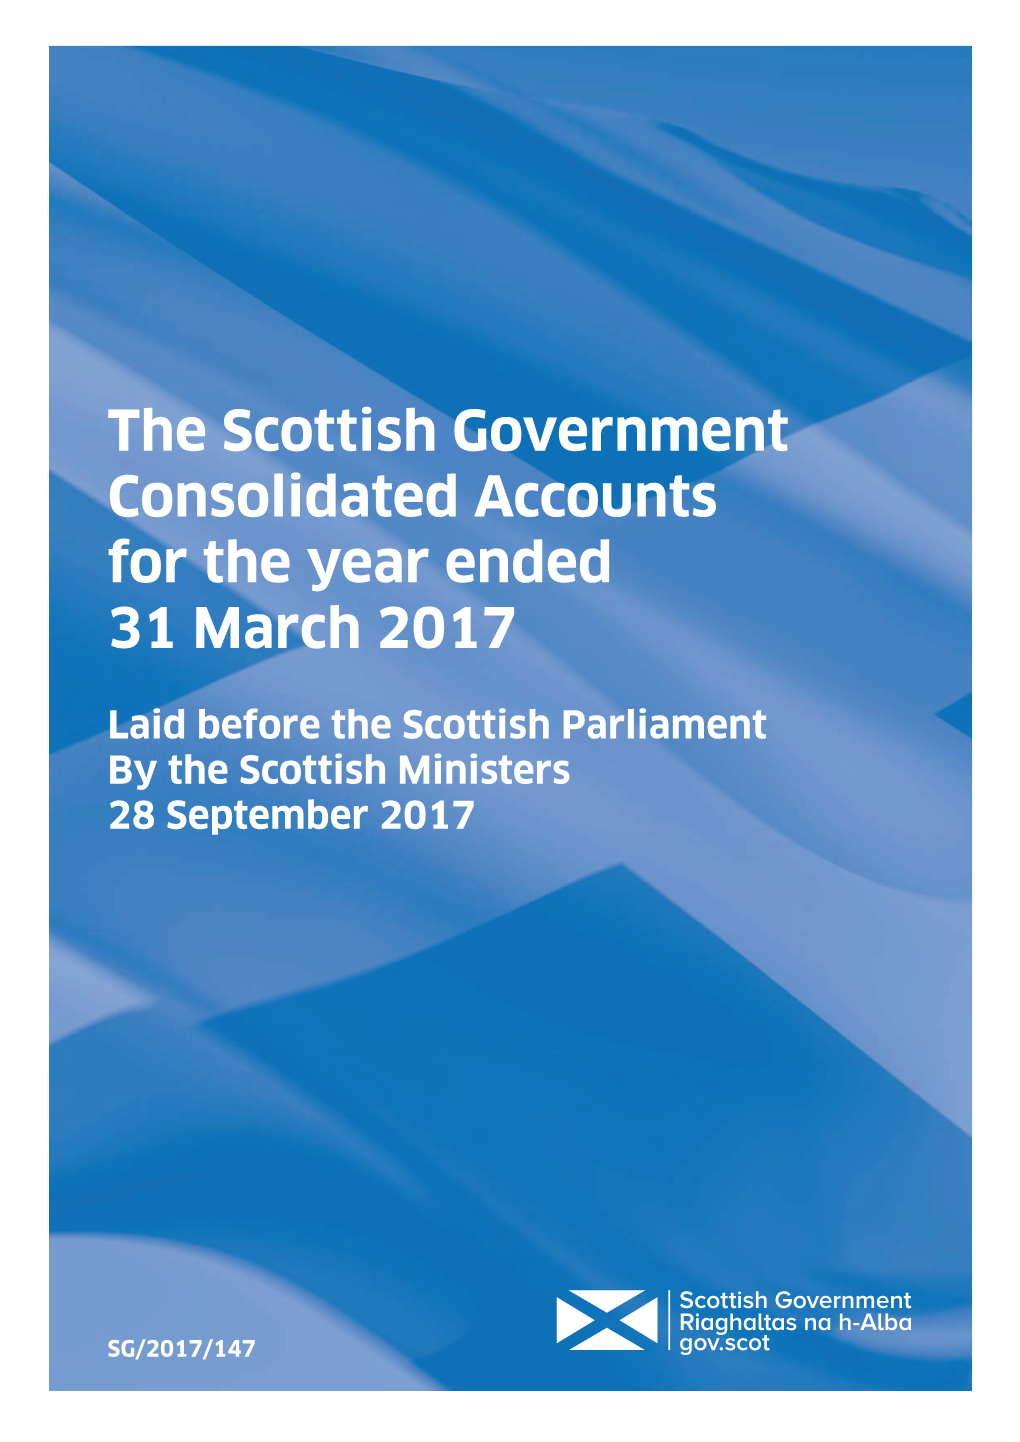 The Scottish Government Consolidated Accounts for the Year Ended 31 March 2017